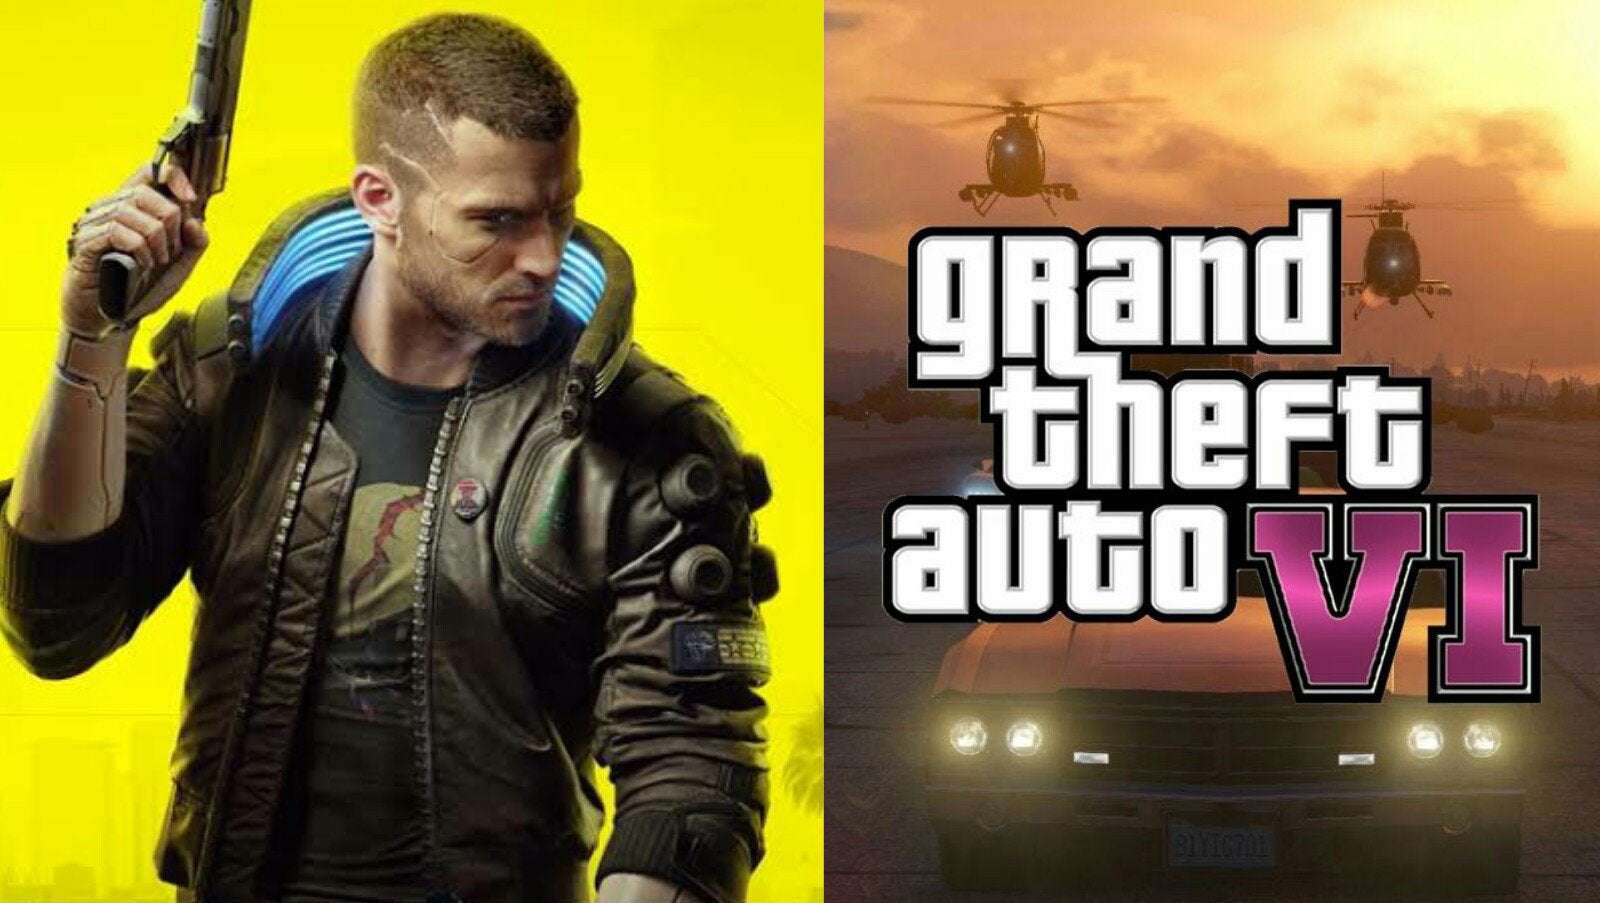 image for 'GTA 6' Fans Ask Rockstar to Take Its Time on Development After Seeing 'Cyberpunk 2077' On Console